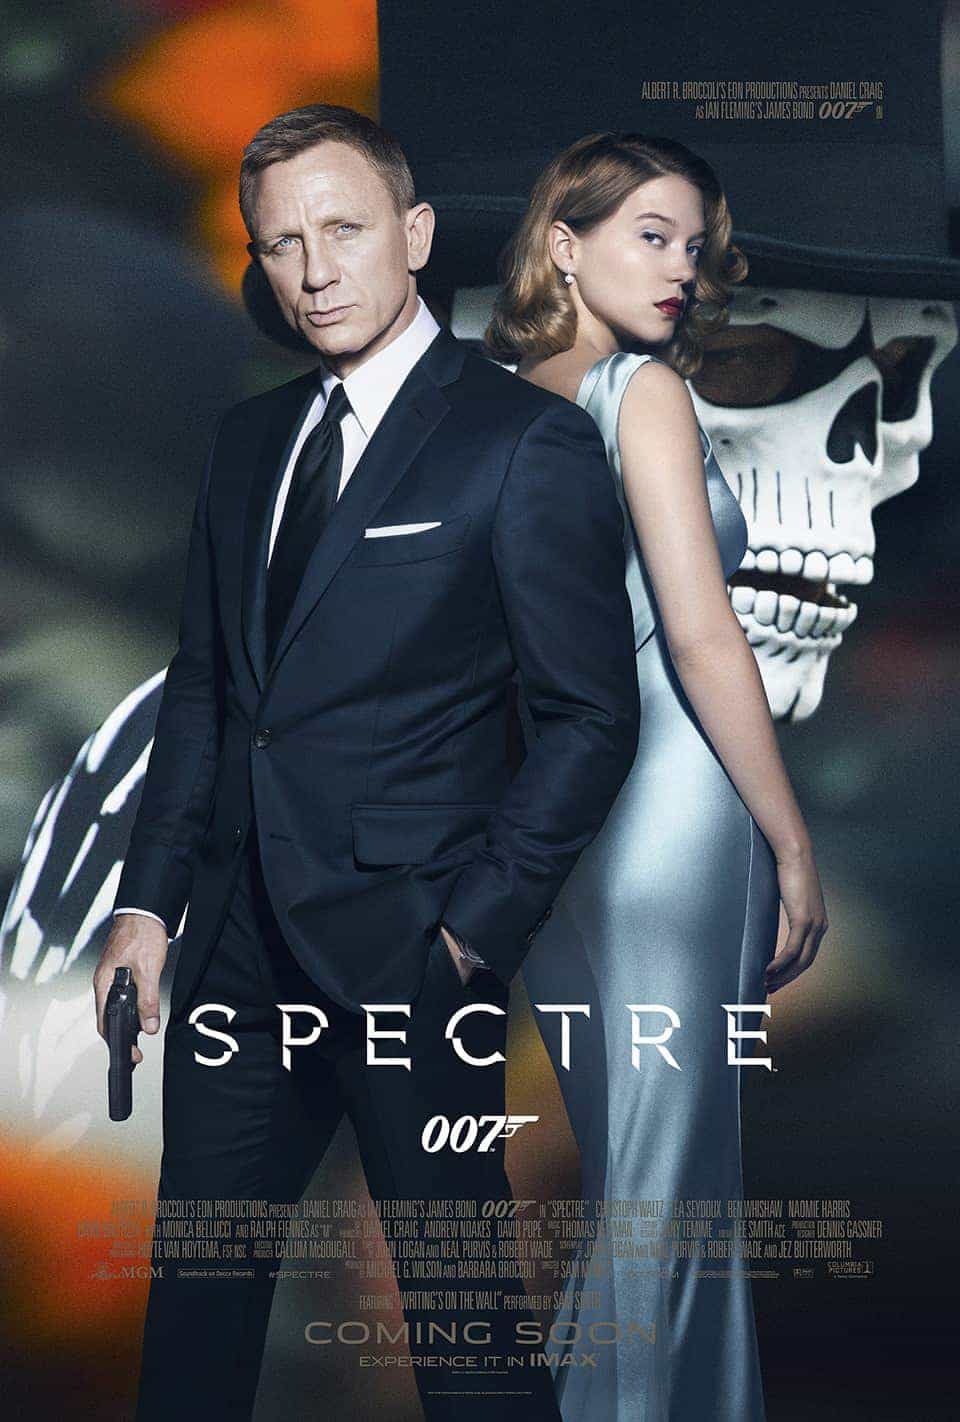 UK Video Charts Weekending 28th February 2016:  Spectre enters at the top